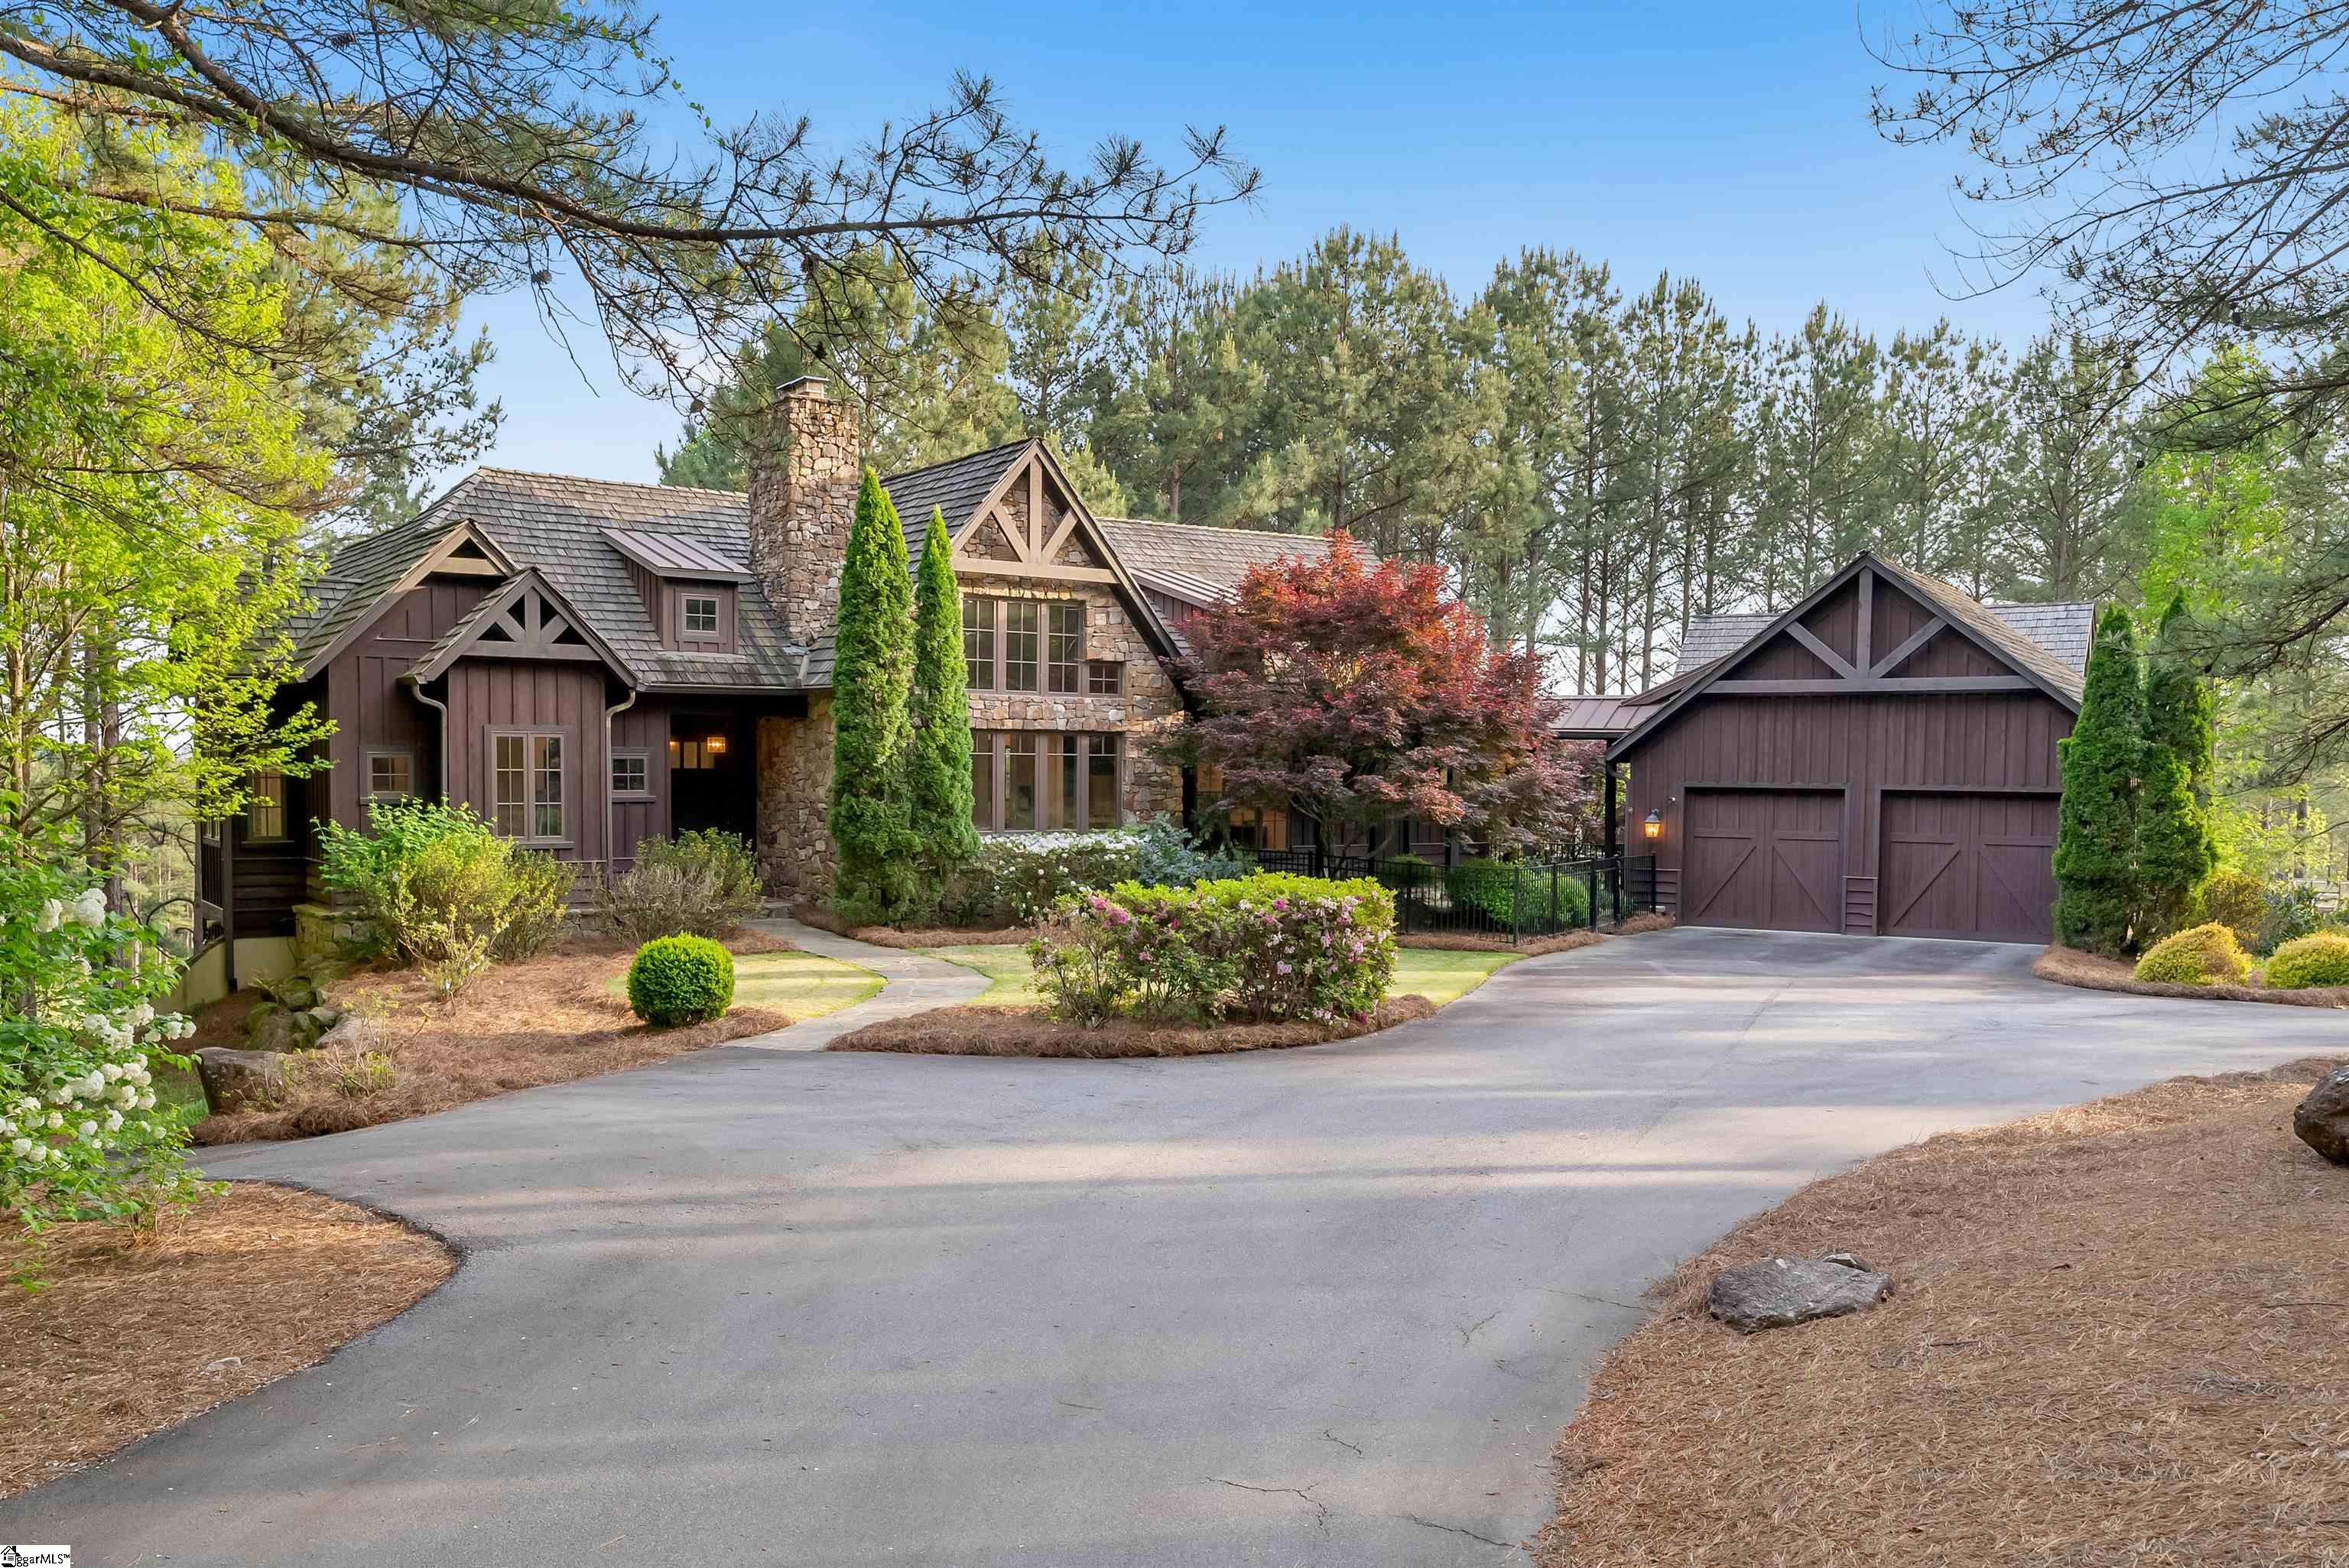 DELIGHTFULLY REIMAGINED & IMPECCABLY FURNISHED! This turn-key home is nestled on a beautiful 2.84-acre lot overlooking the 6th green of The Reserve at Lake Keowee’s Jack Nicklaus signature golf course. In addition to the main house, there is a spacious guest house…a compound that is truly one of a kind. AND it is move in ready and totally furnished! It features over $600K in upgrades - completely remodeled since 2020. Just a short golf cart ride from The Reserve’s village and amenities, 355 Keowee provides an optimum investment opportunity for family getaways or casual business retreats. This mountain contemporary home provides a comfortable escape for two, and will graciously expand to accommodate gatherings of twenty. There are 6 bedrooms (plus sleeping loft), 5 full/3 half baths, 3 living areas, 3 fireplaces, 5 porches. All living/entertainment rooms have stunning views of the golf course and the surrounding hills. There are multiple master suites, two kitchens, plus numerous indoor and outdoor living areas. A spectacular game room with bar is perfect for a variety of festive gatherings, whether it’s game night, college football watch party, or Sunday at the Masters! Or just turn on your playlist music with the entertainment system – now that’s a party! Here are a few additions that could seal the deal: Wolf professional range in main kitchen, main house porch with retractable screens, bunkroom that sleeps 6, a whole house generator (main house), golf cart and storage room, Redline garage storage cabinet system, a large fenced dog yard, two Control 4 entertainment systems, multiple large-screen televisions, an AOG gas grill and a Traeger smoker. Are you hoping to enjoy a Lake Keowee area home ASAP? Or perhaps a lot owner with sticker shock with quotes for a custom-built home? OR looking at homes that need renovation to suit your needs? Rest assured that this home is ready for you, your family & guests for summer 2024! RLK Premier membership is required. $72,000 membership fee is not included; Buyer to pay at closing.